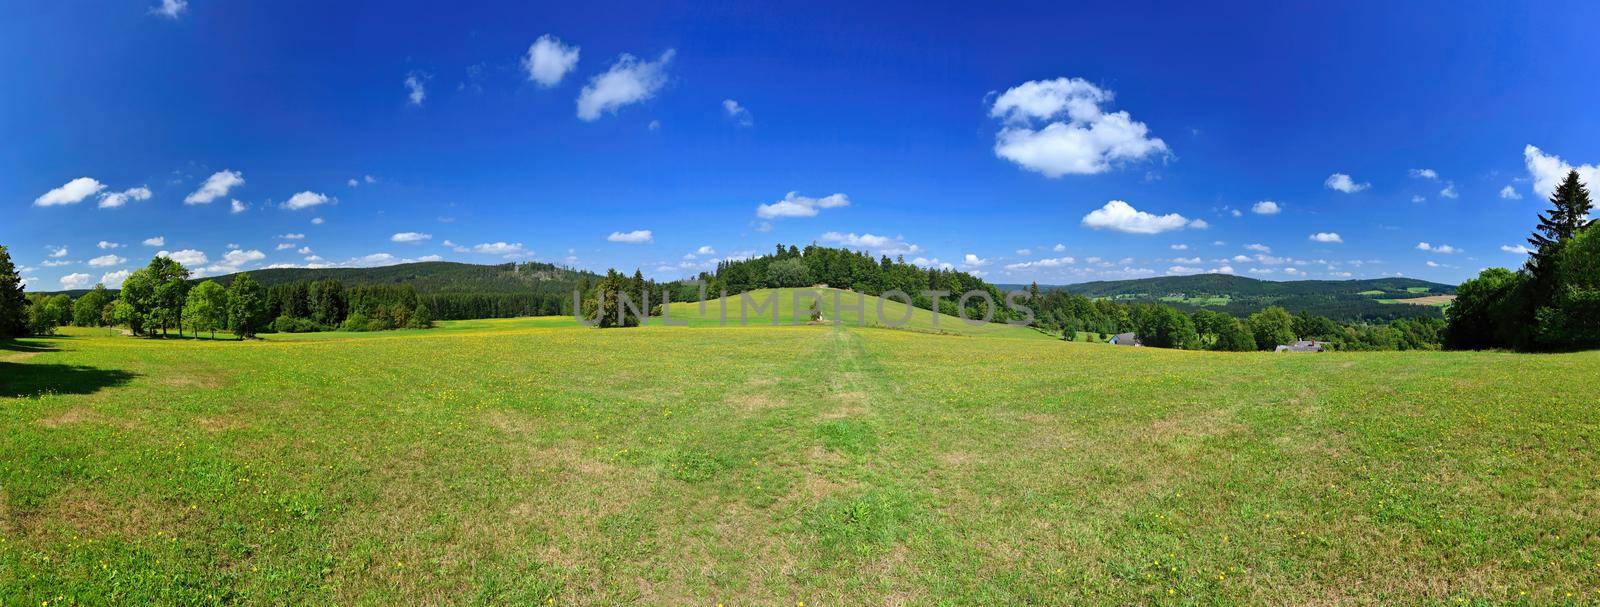 Beautiful summer panorama landscape with nature. Meadow with forest and blue sky on a sunny day. Highlands - Czech Republic by Montypeter